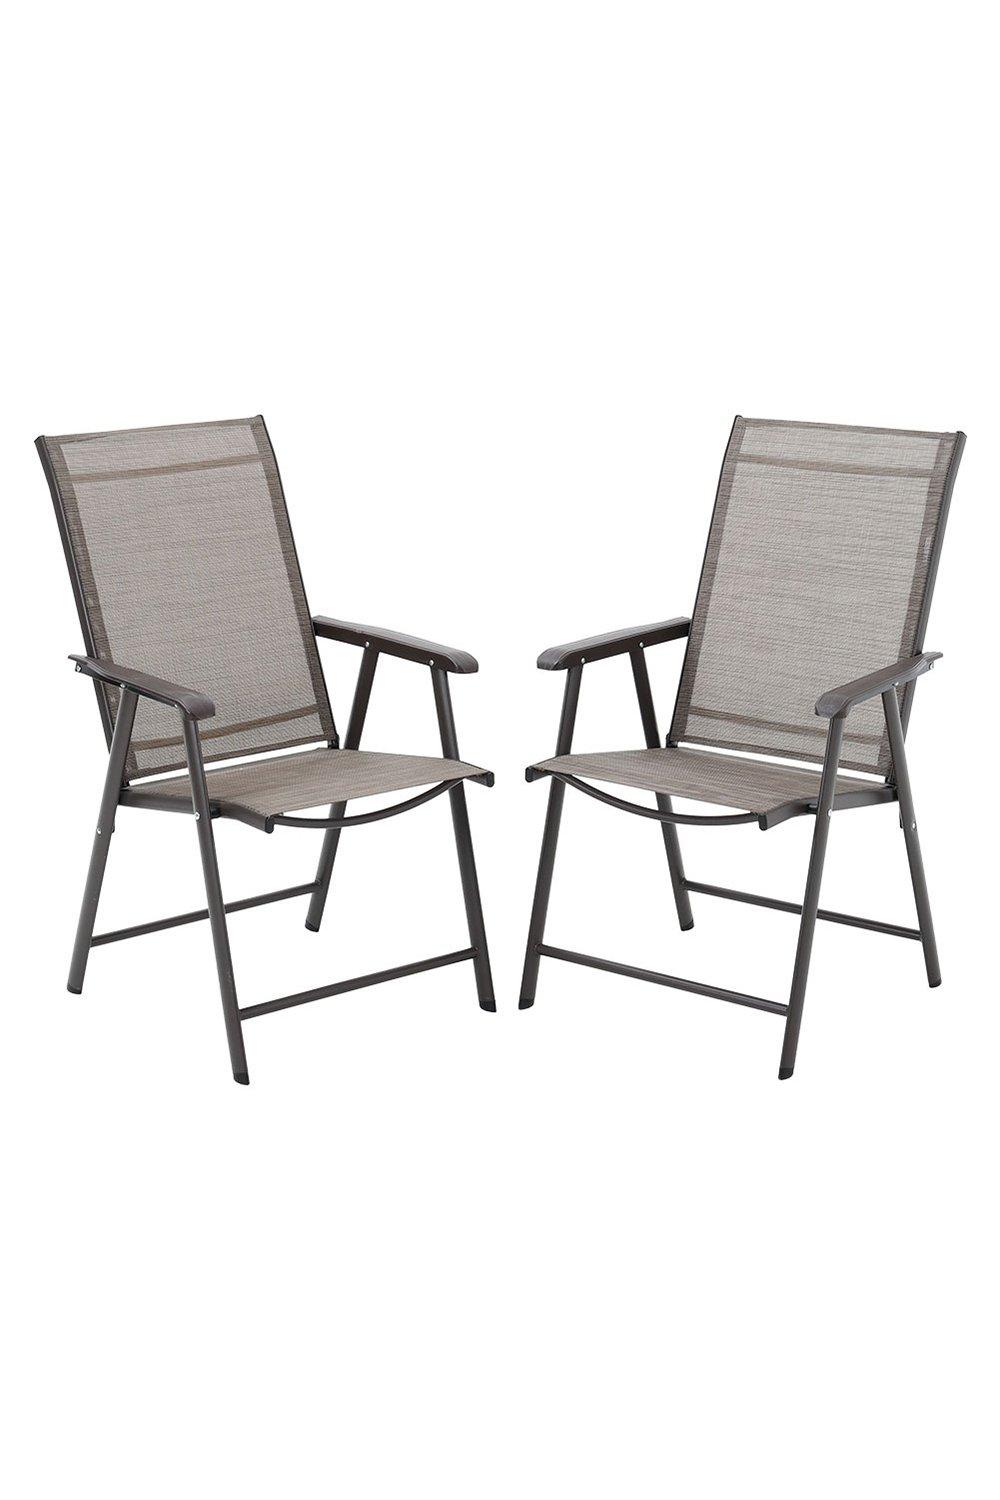 Outdoor Metal Foldable Chairs Set of 2